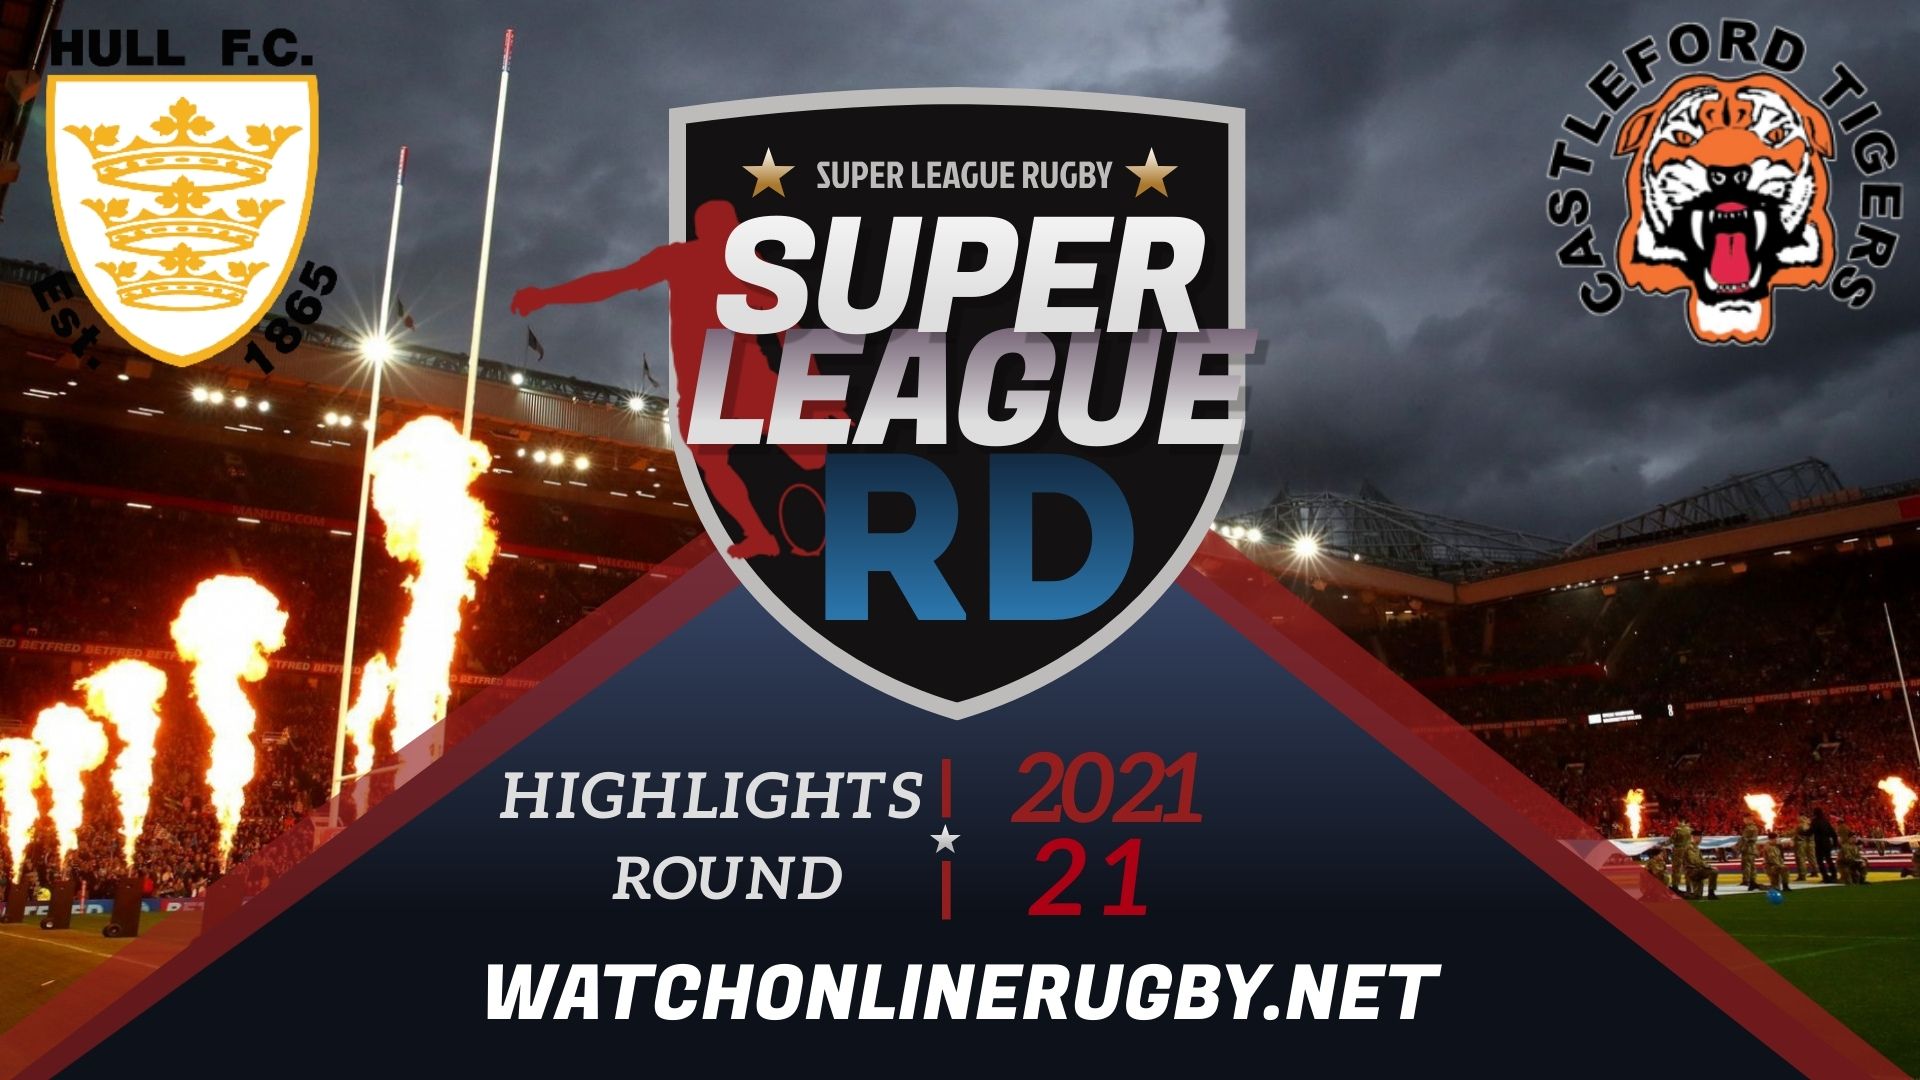 Hull FC Vs Castleford Tigers Super League Rugby 2021 RD 21